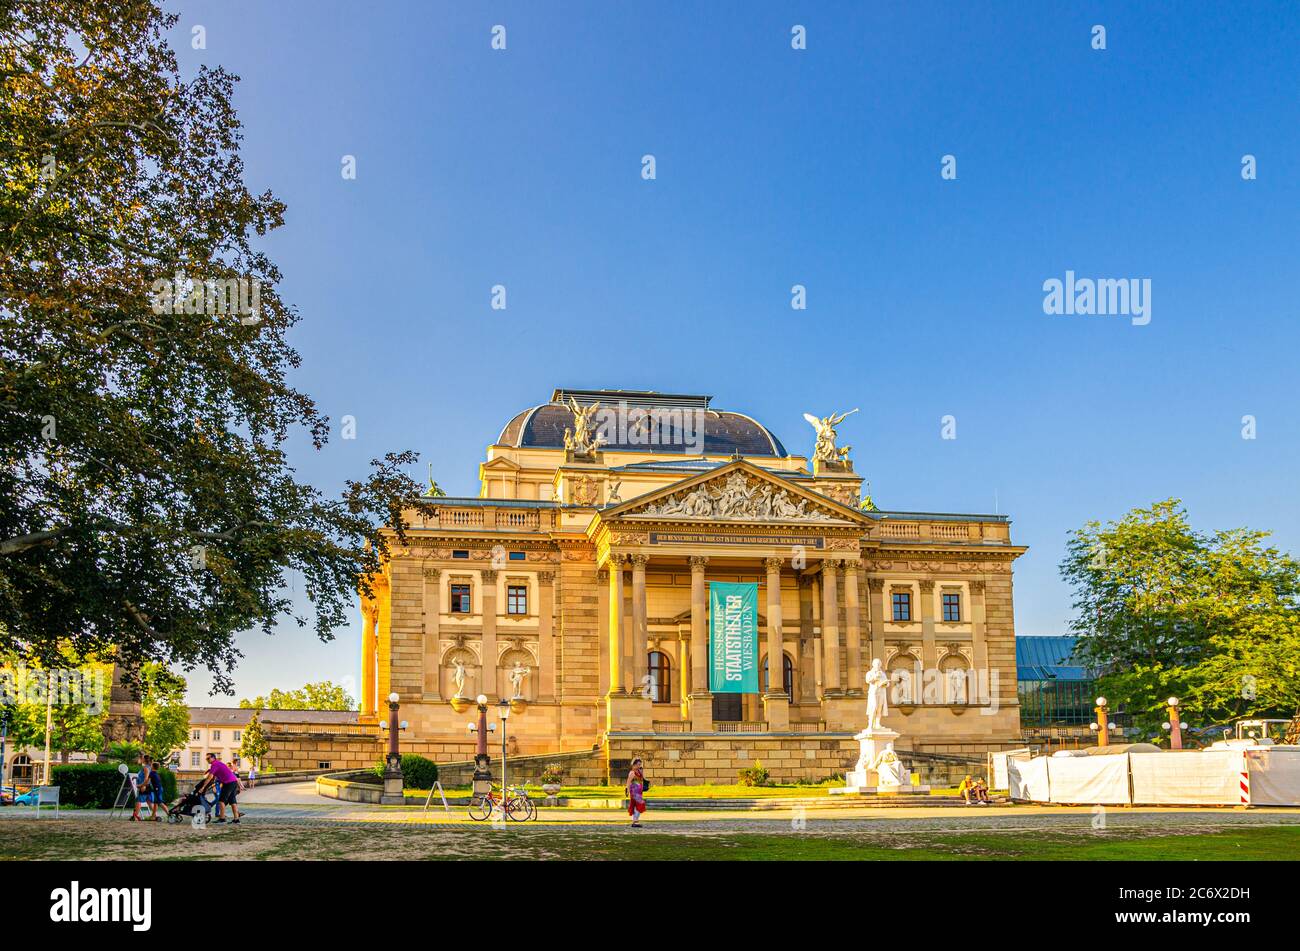 Wiesbaden, Germany, August 24, 2019: Hessisches Staatstheater State Theatre building with columns in historical city centre, blue sky background, State of Hesse Stock Photo